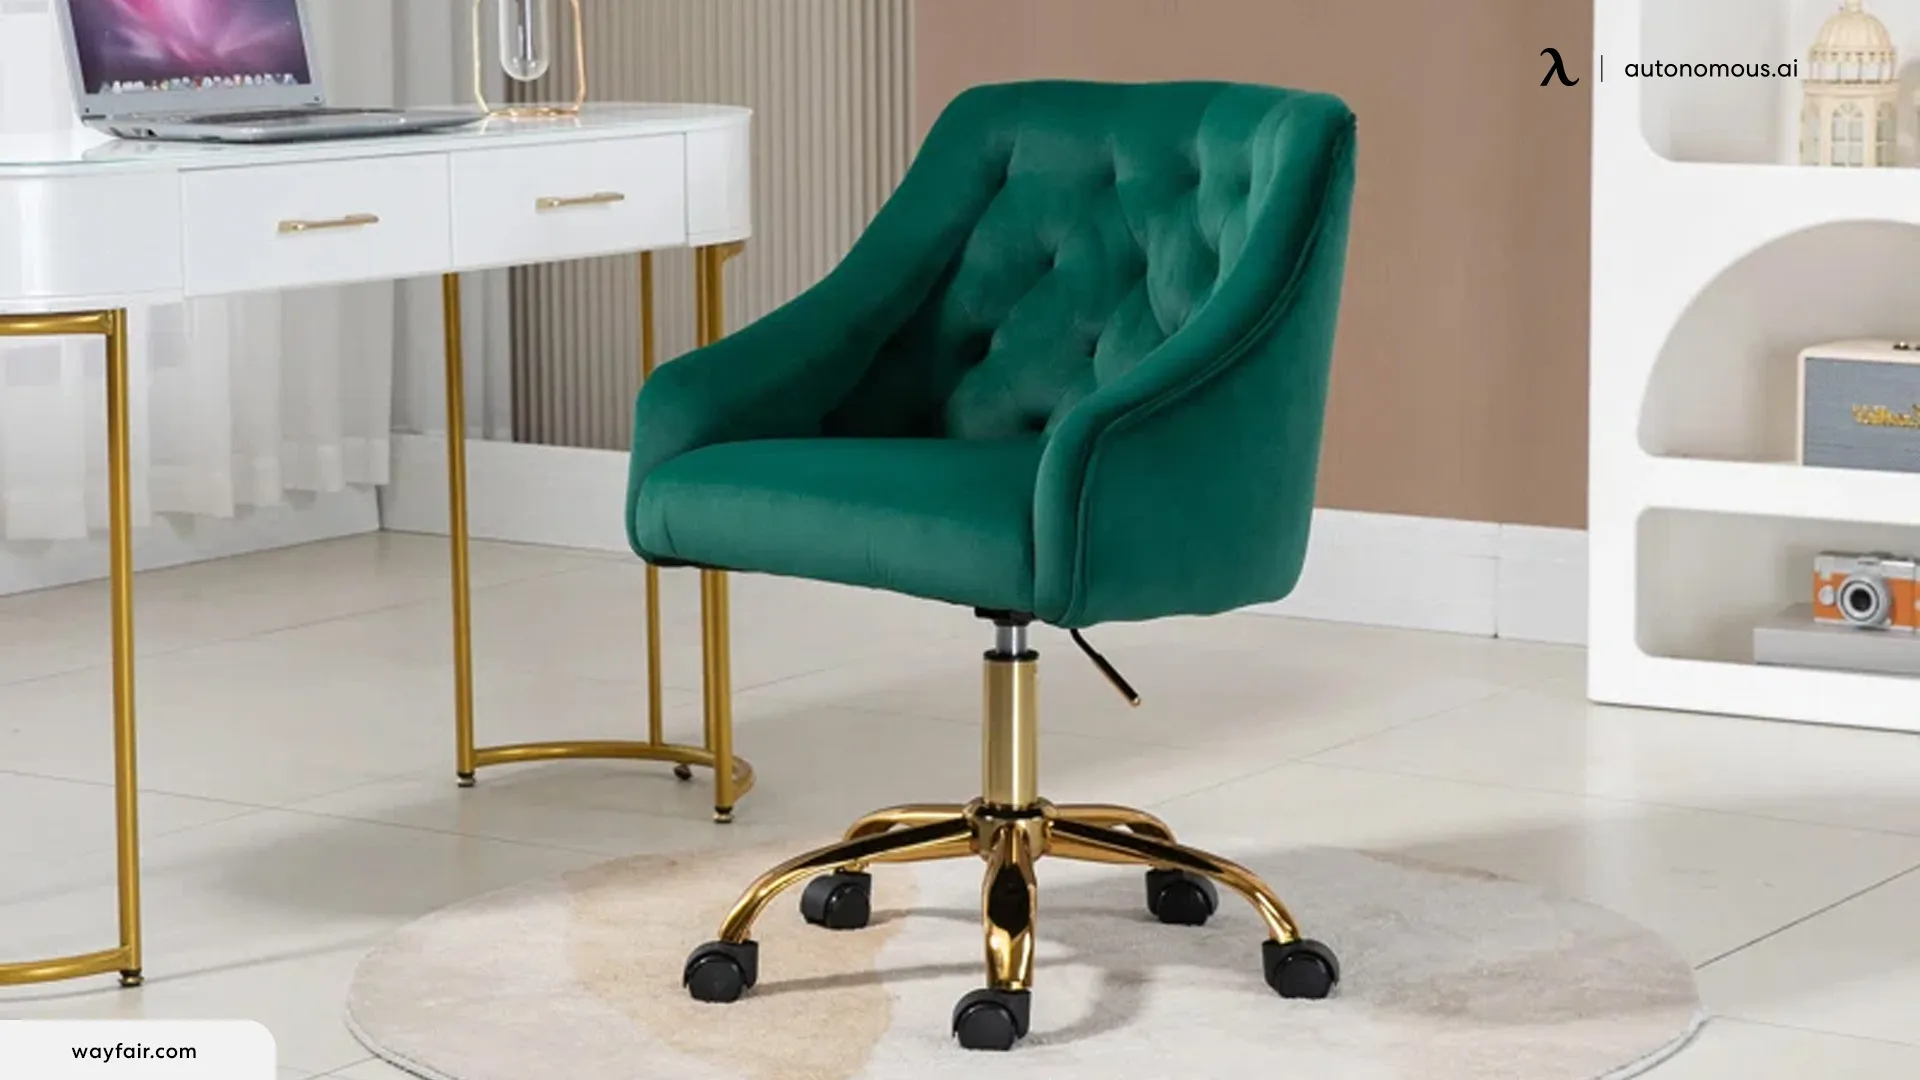 Upgrade Your Workspace with a Green Office Desk Chair